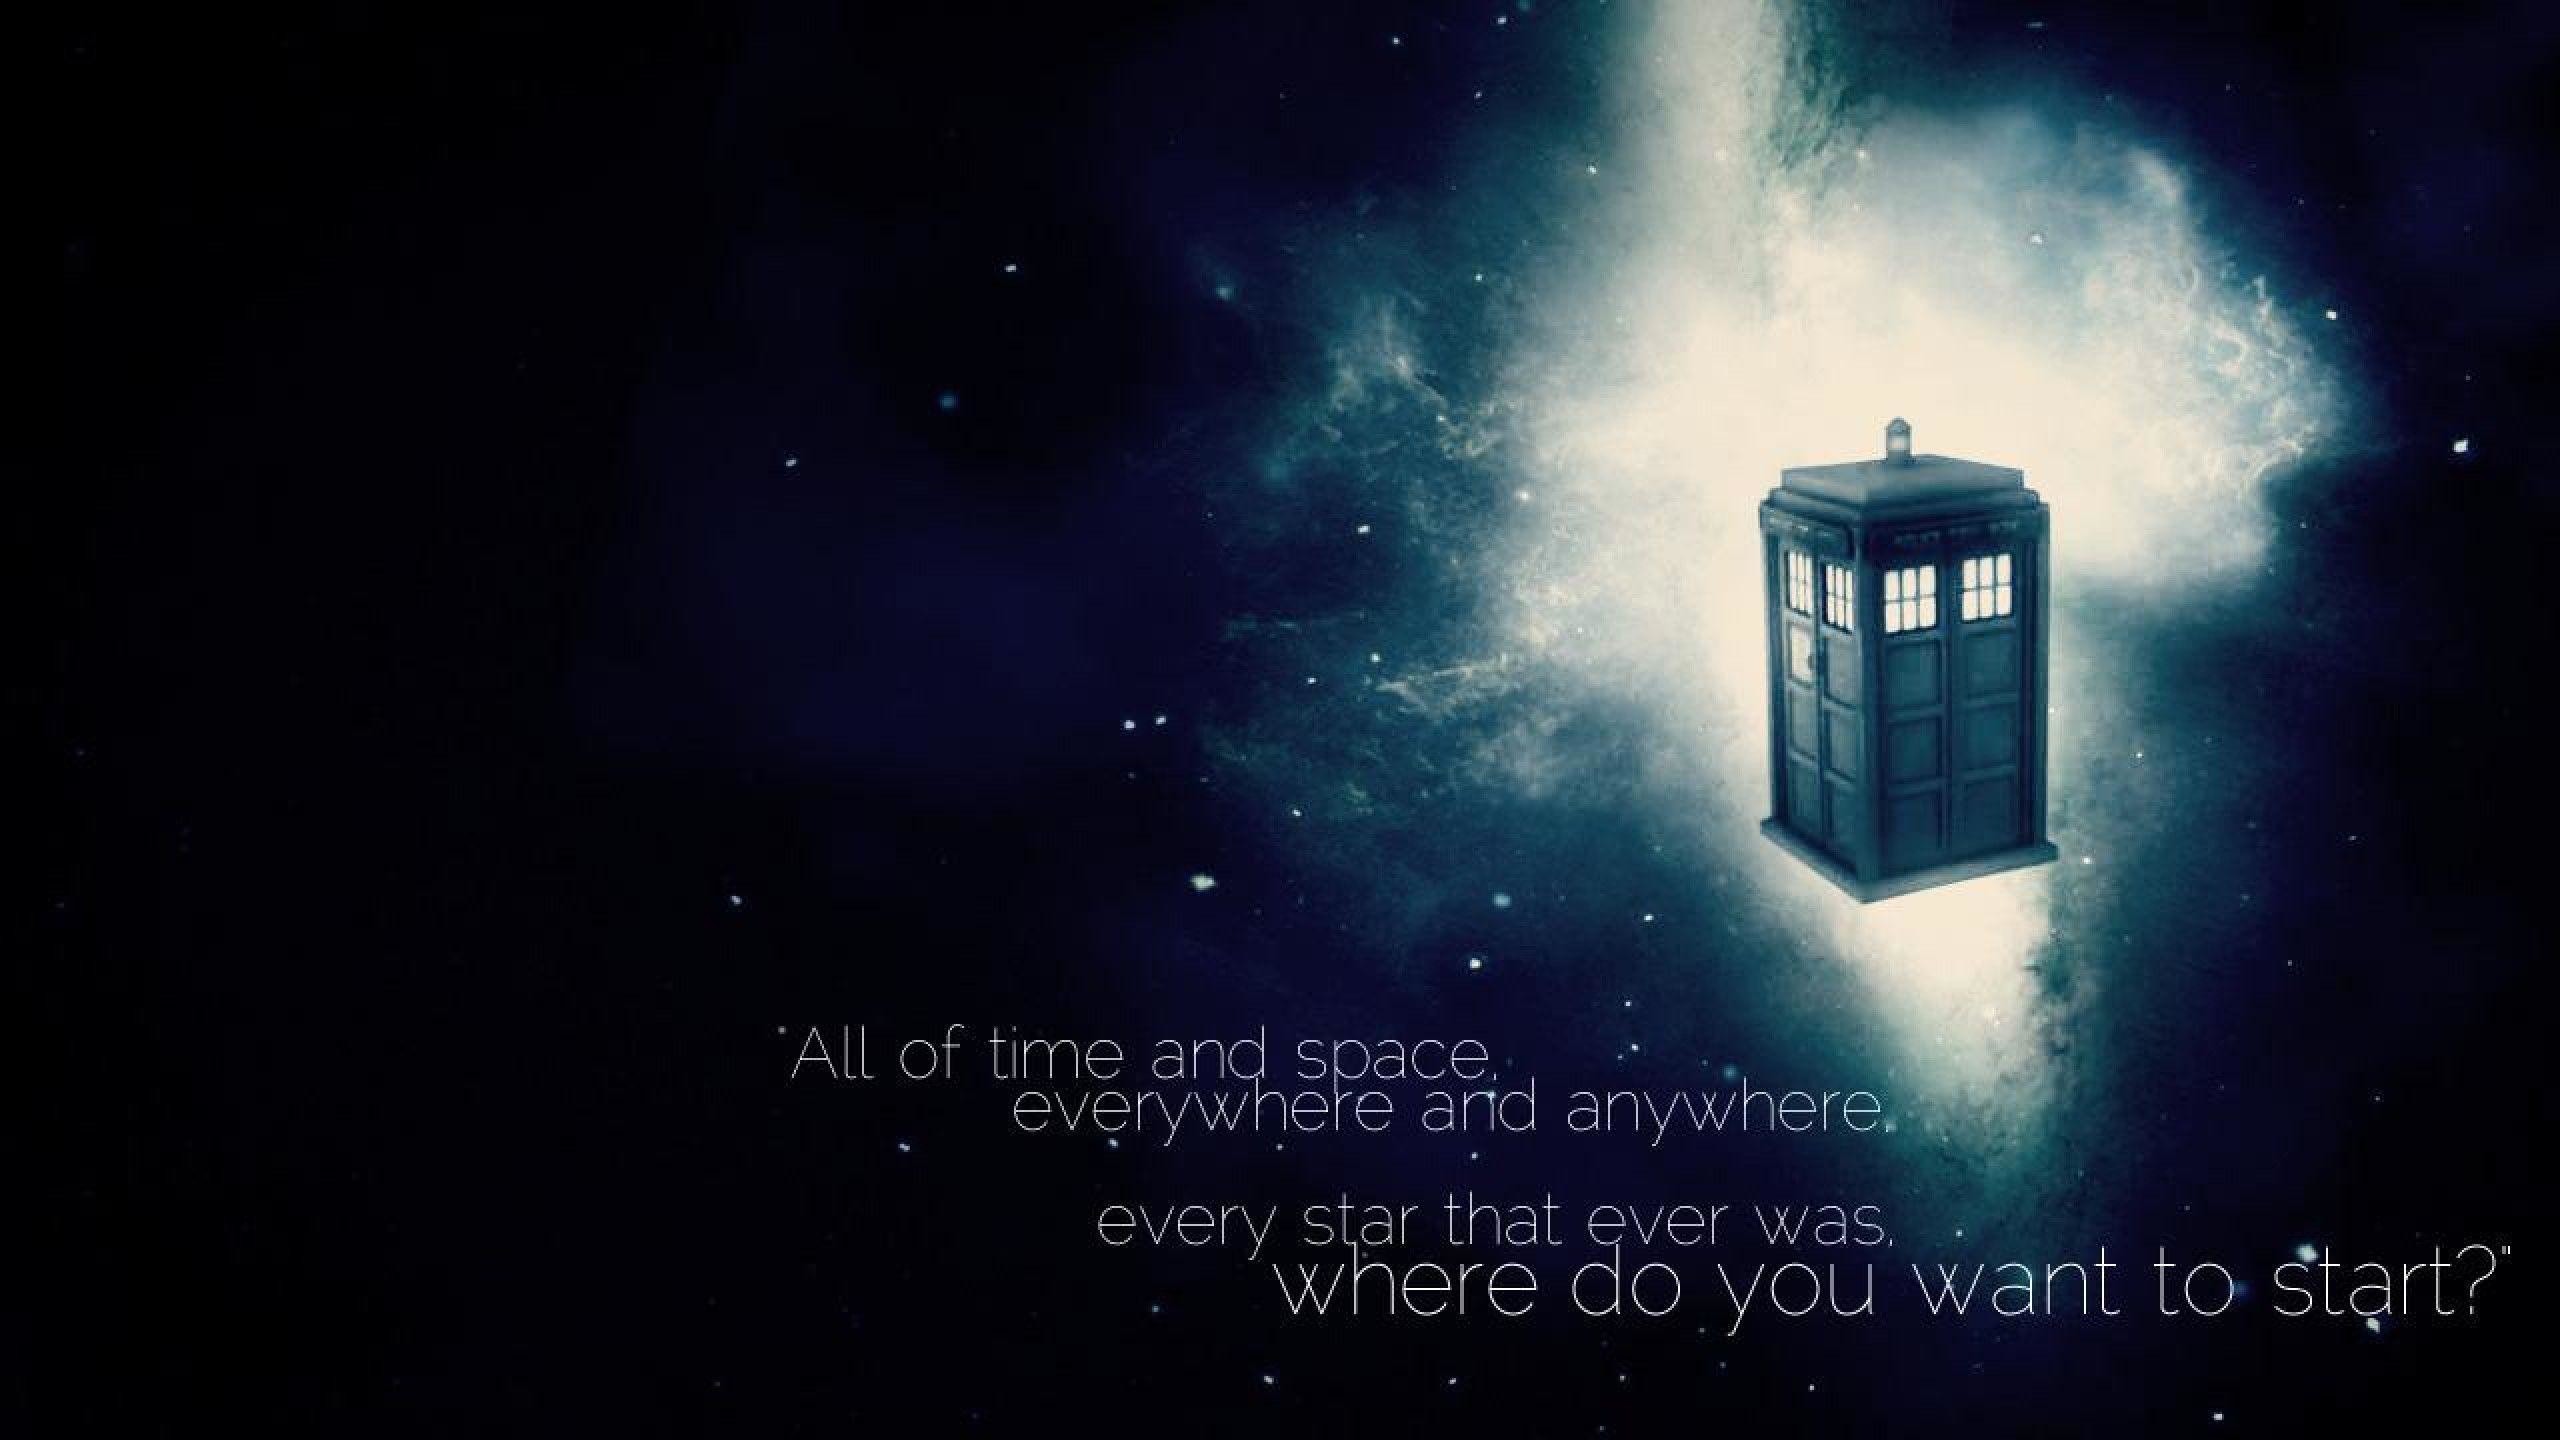 doctor-who-ipad-movie-picture-doctor-who-wallpaper doctor